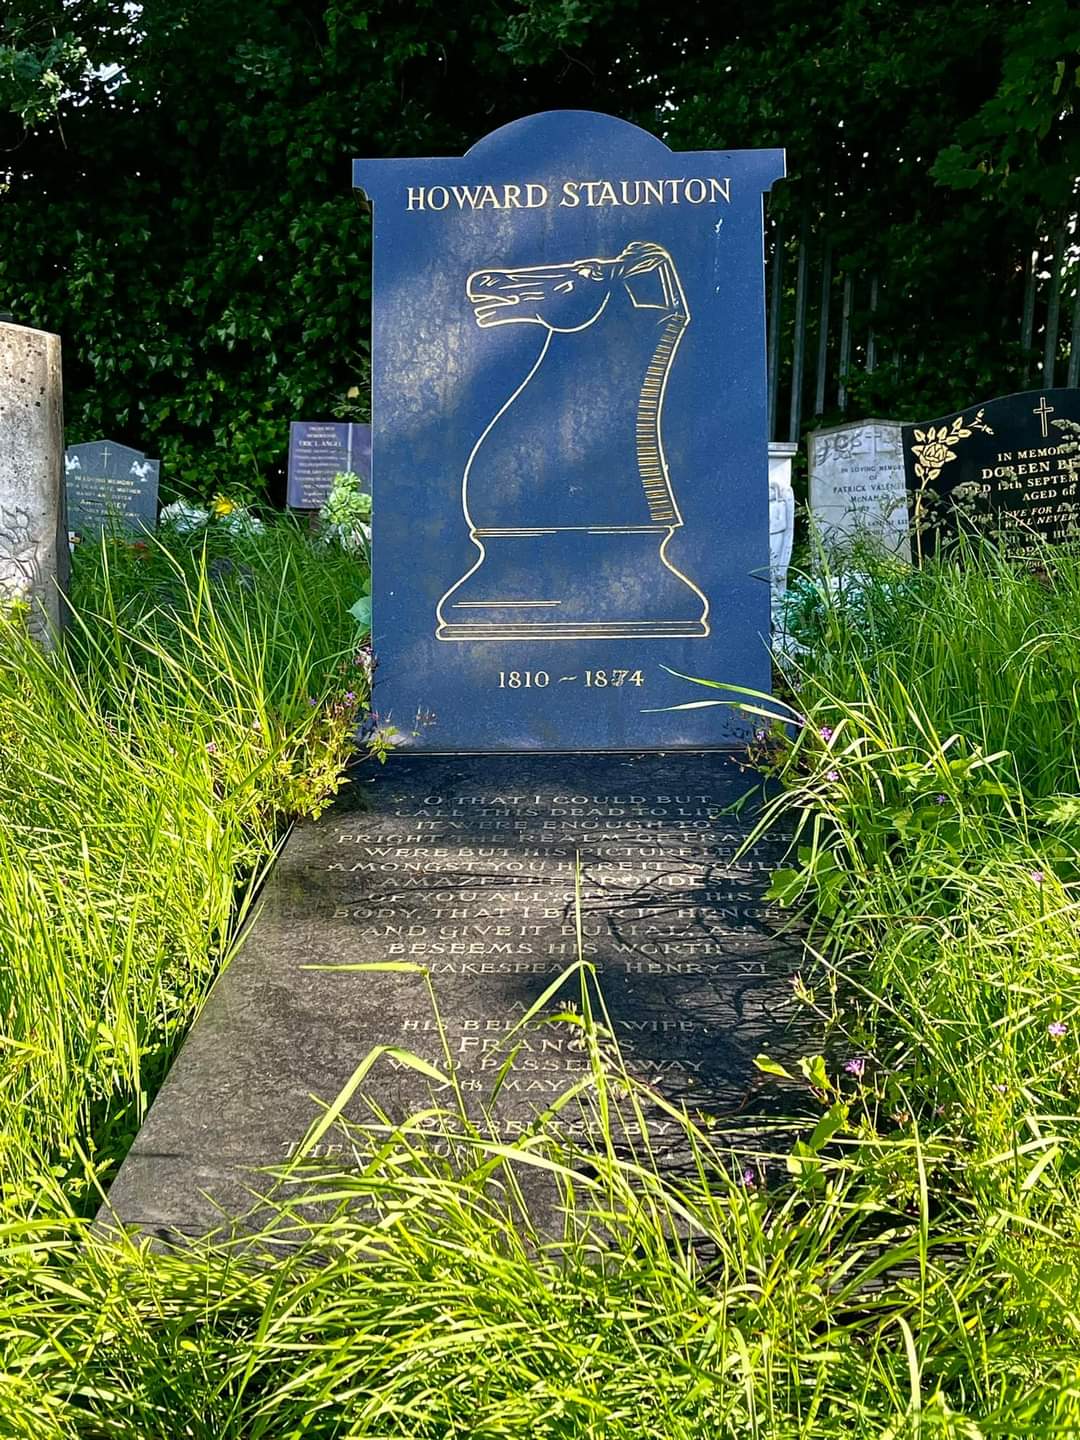 Howard Staunton's grave (courtesy of a traveling friend)